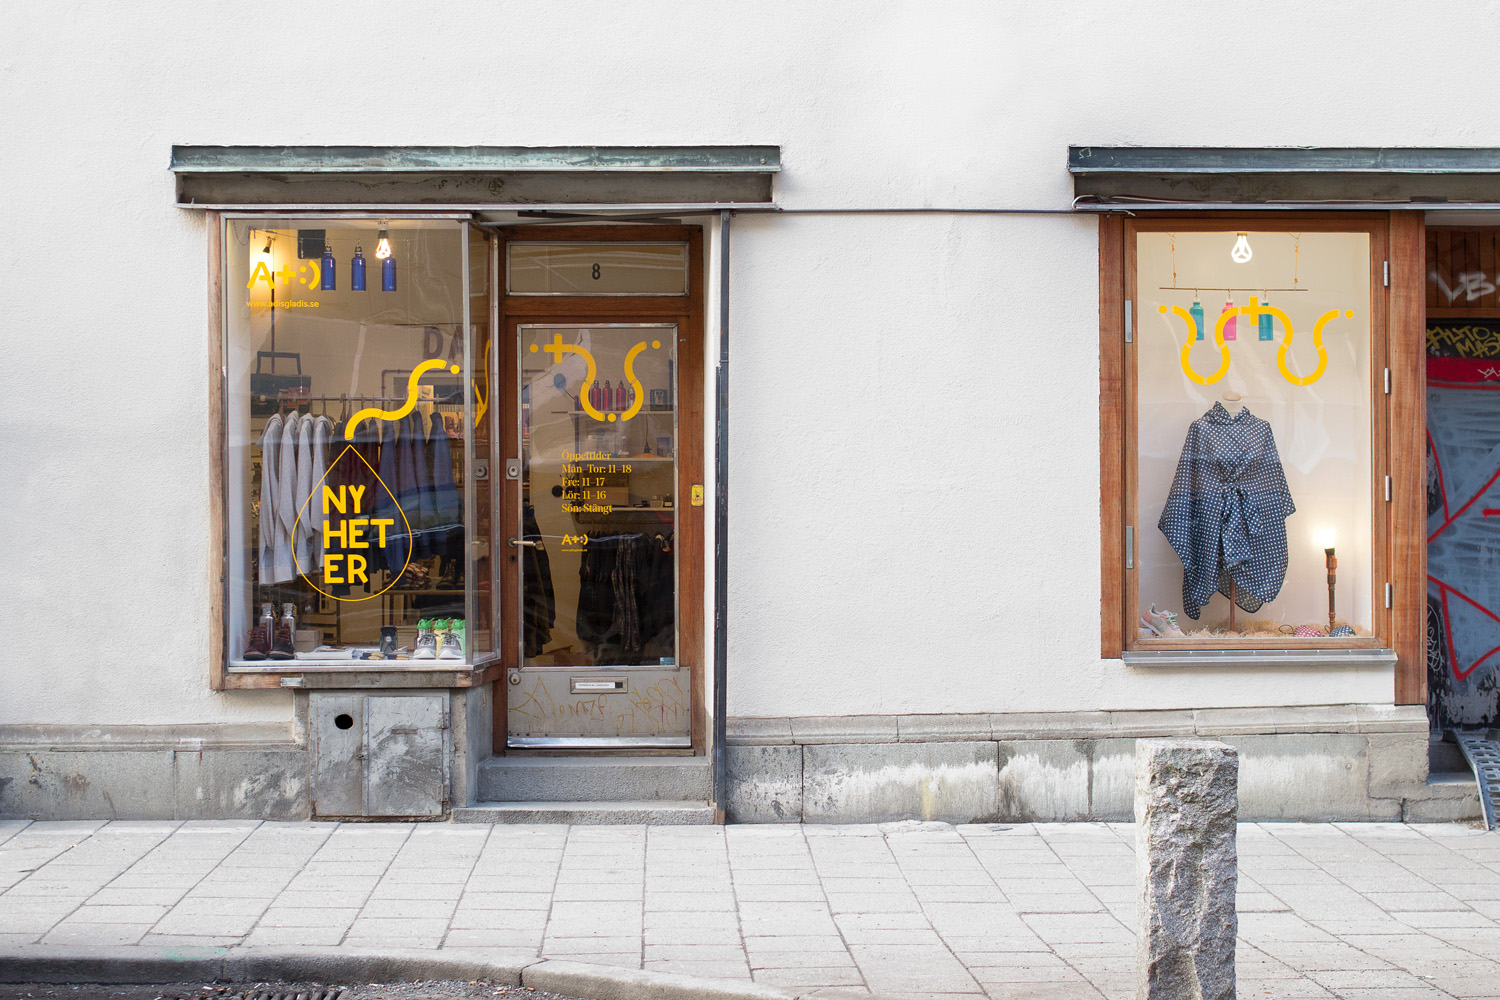 Signage designed by Bedow for Swedish clothing and gadget retailer Adisgladis